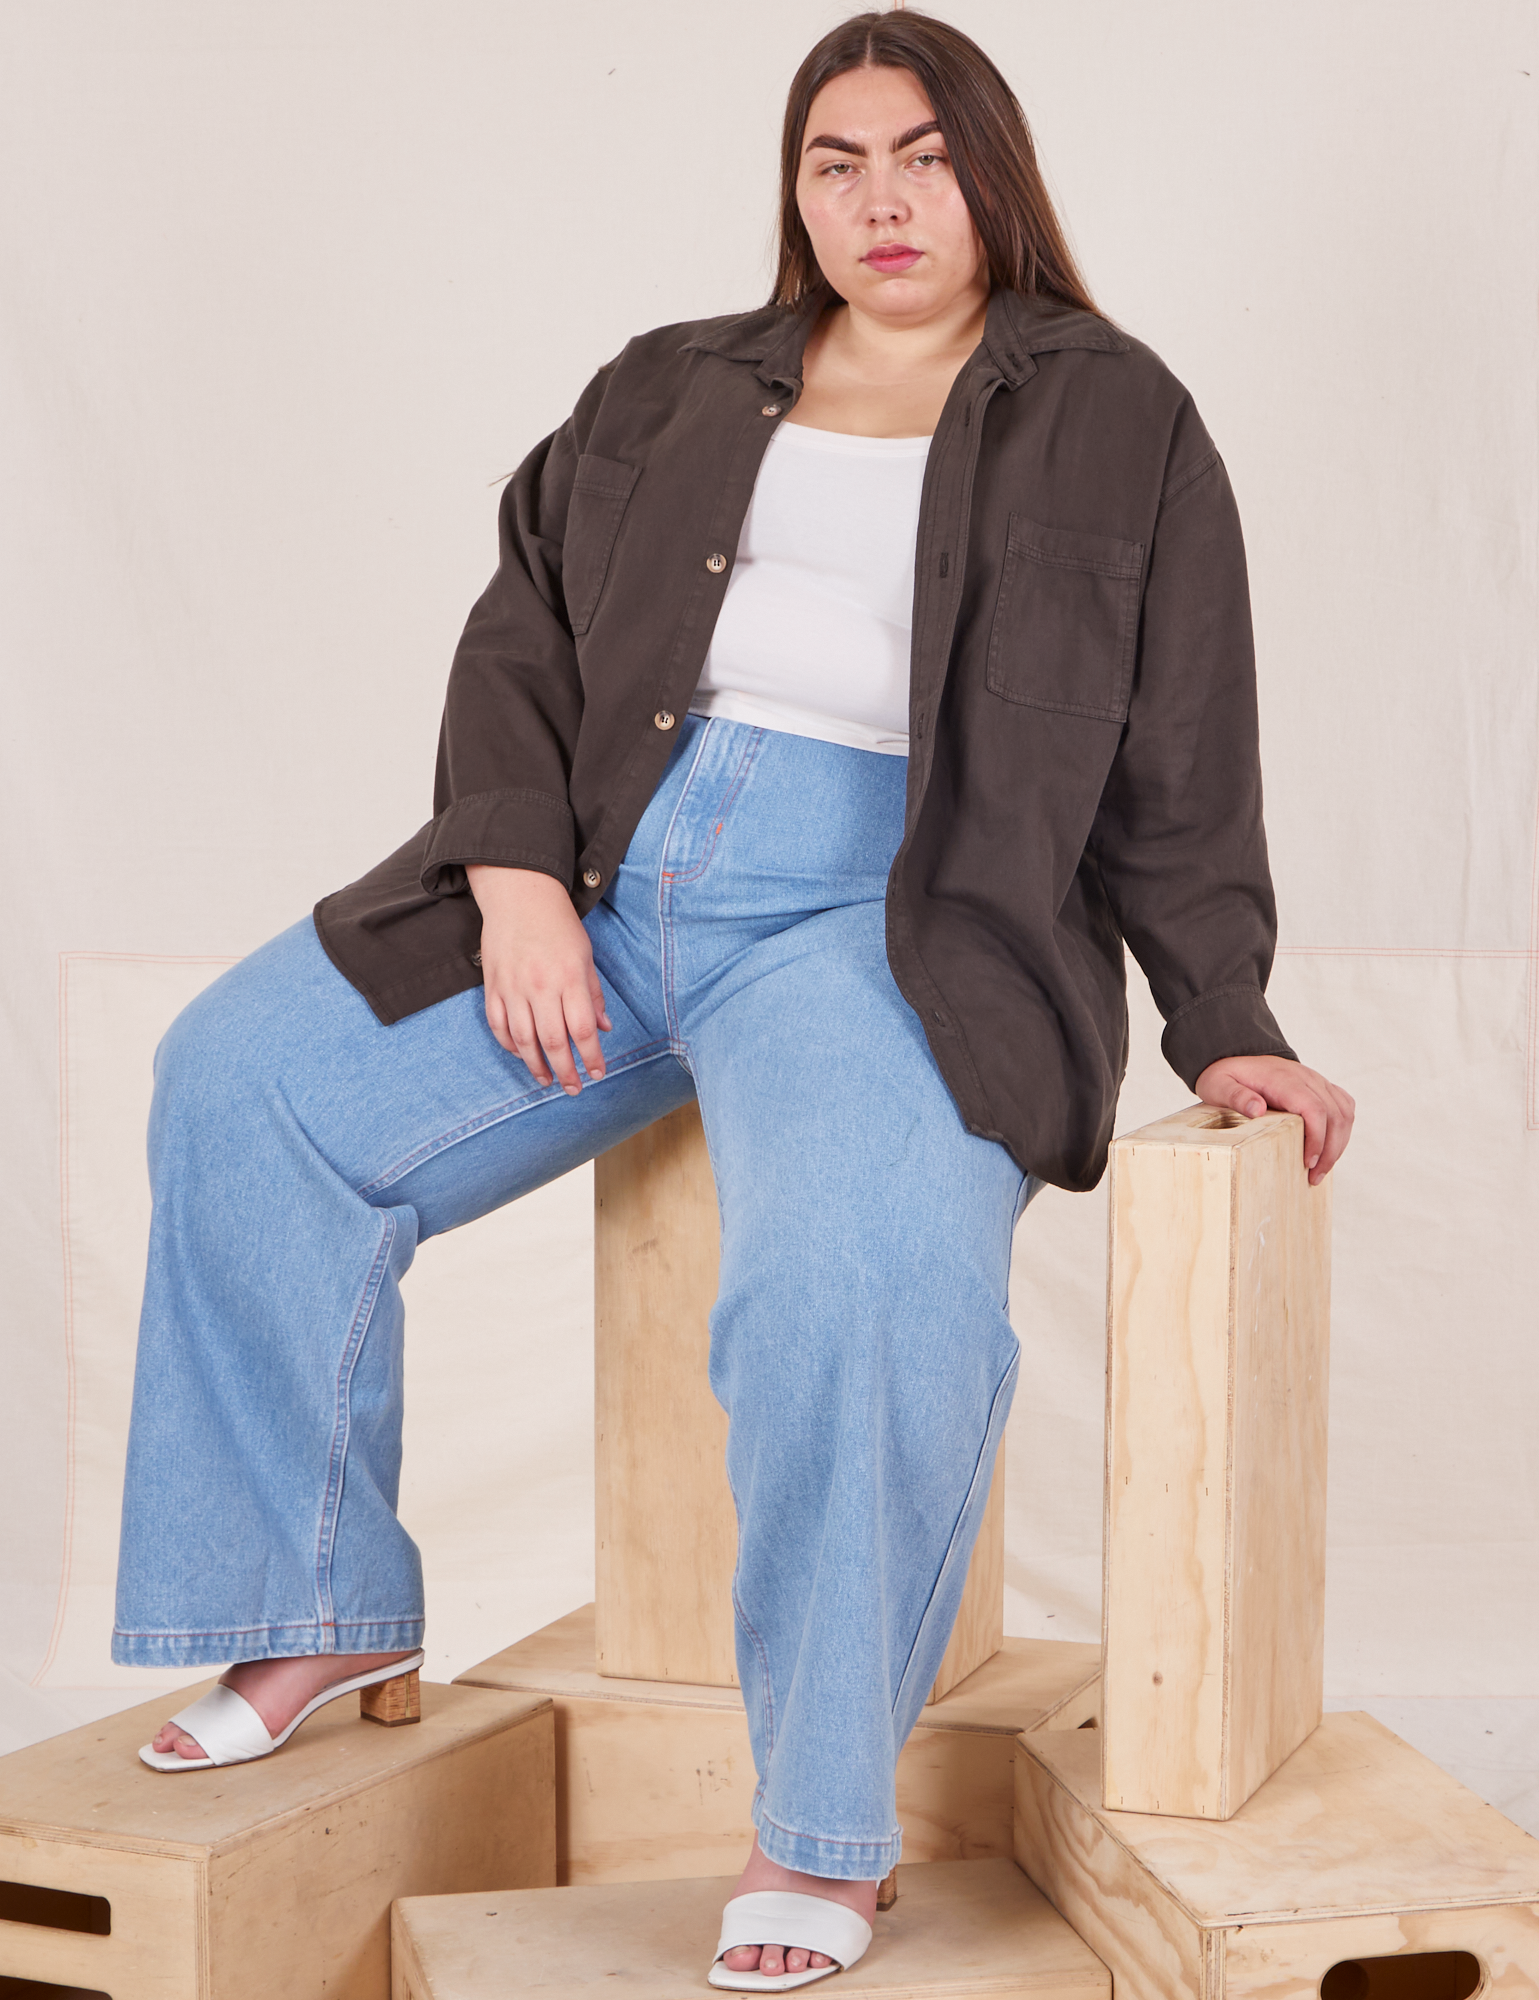 Marielena is wearing Oversize Overshirt in Espresso Brown, vintage off-white Cropped Tank Top, and light wash Sailor Jeans